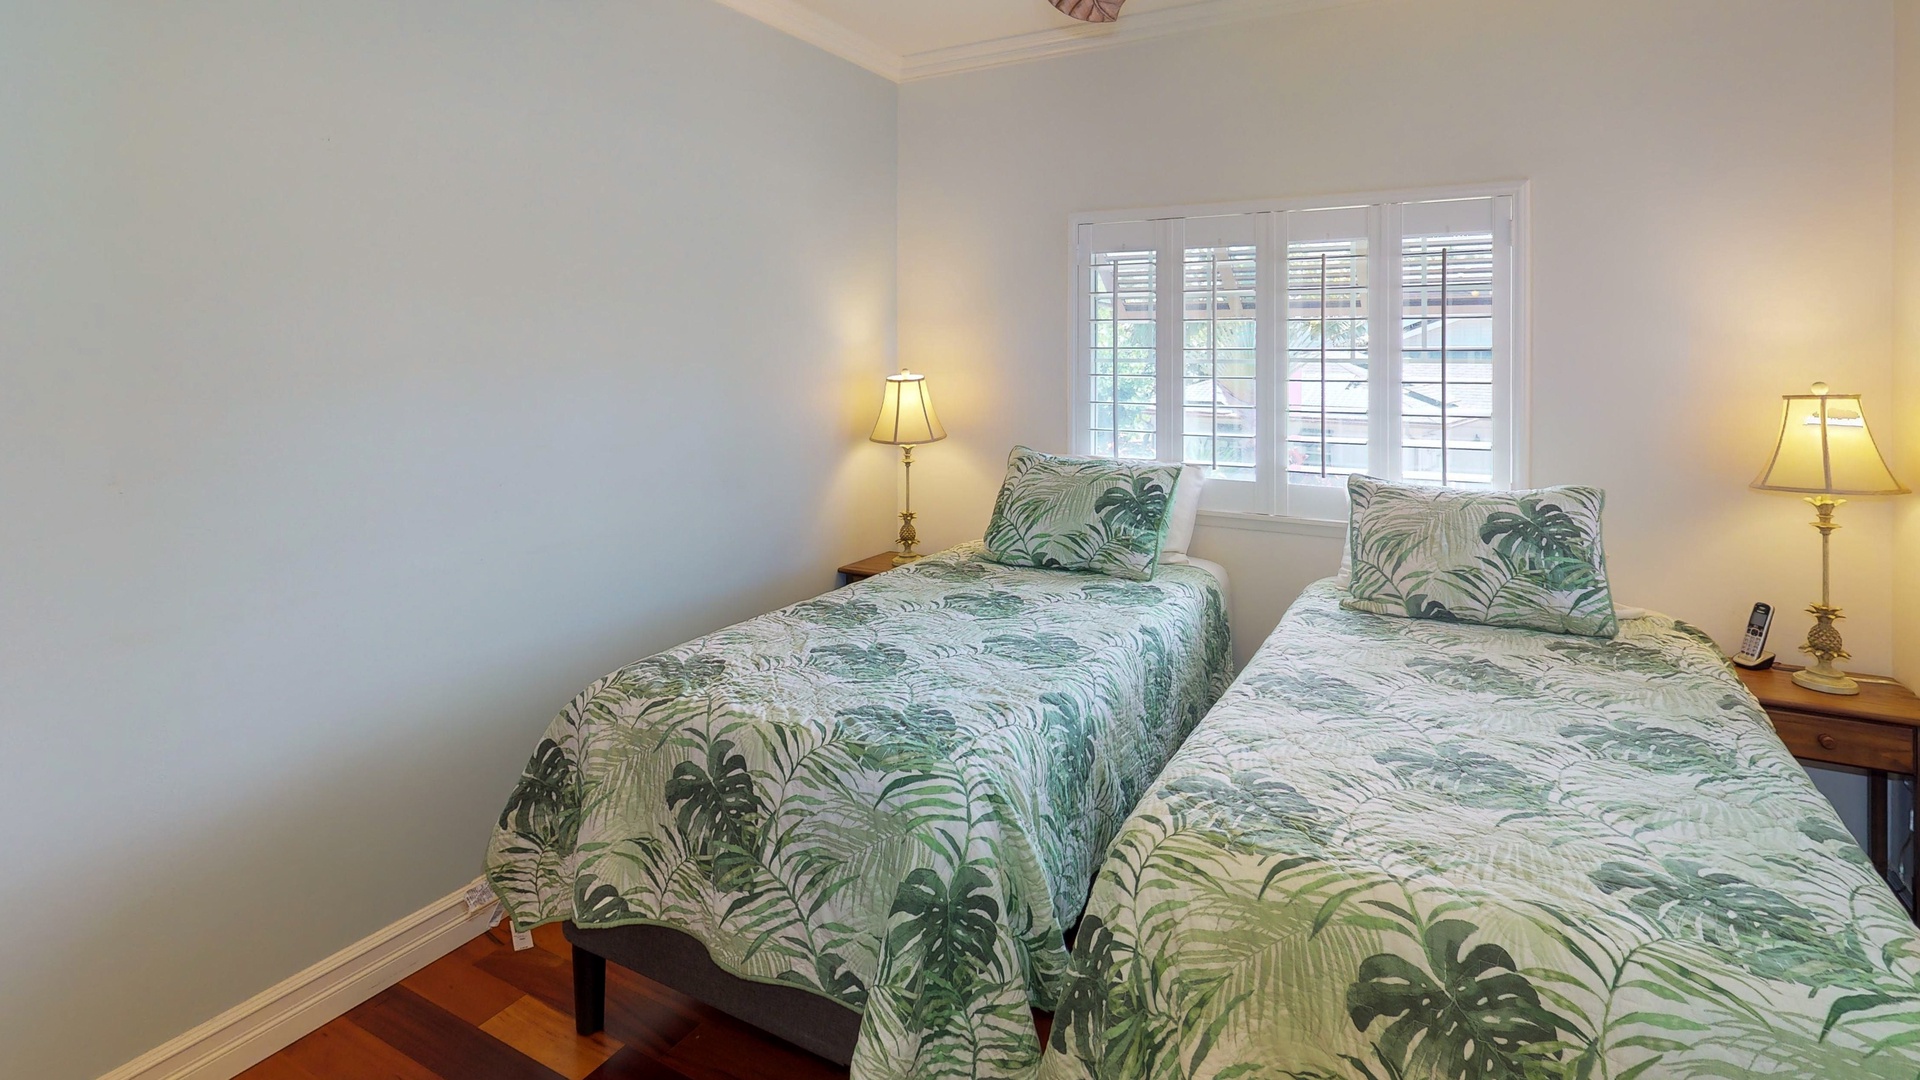 Kapolei Vacation Rentals, Coconut Plantation 1200-4 - Twin beds in the guest bedroom with natural lighting.